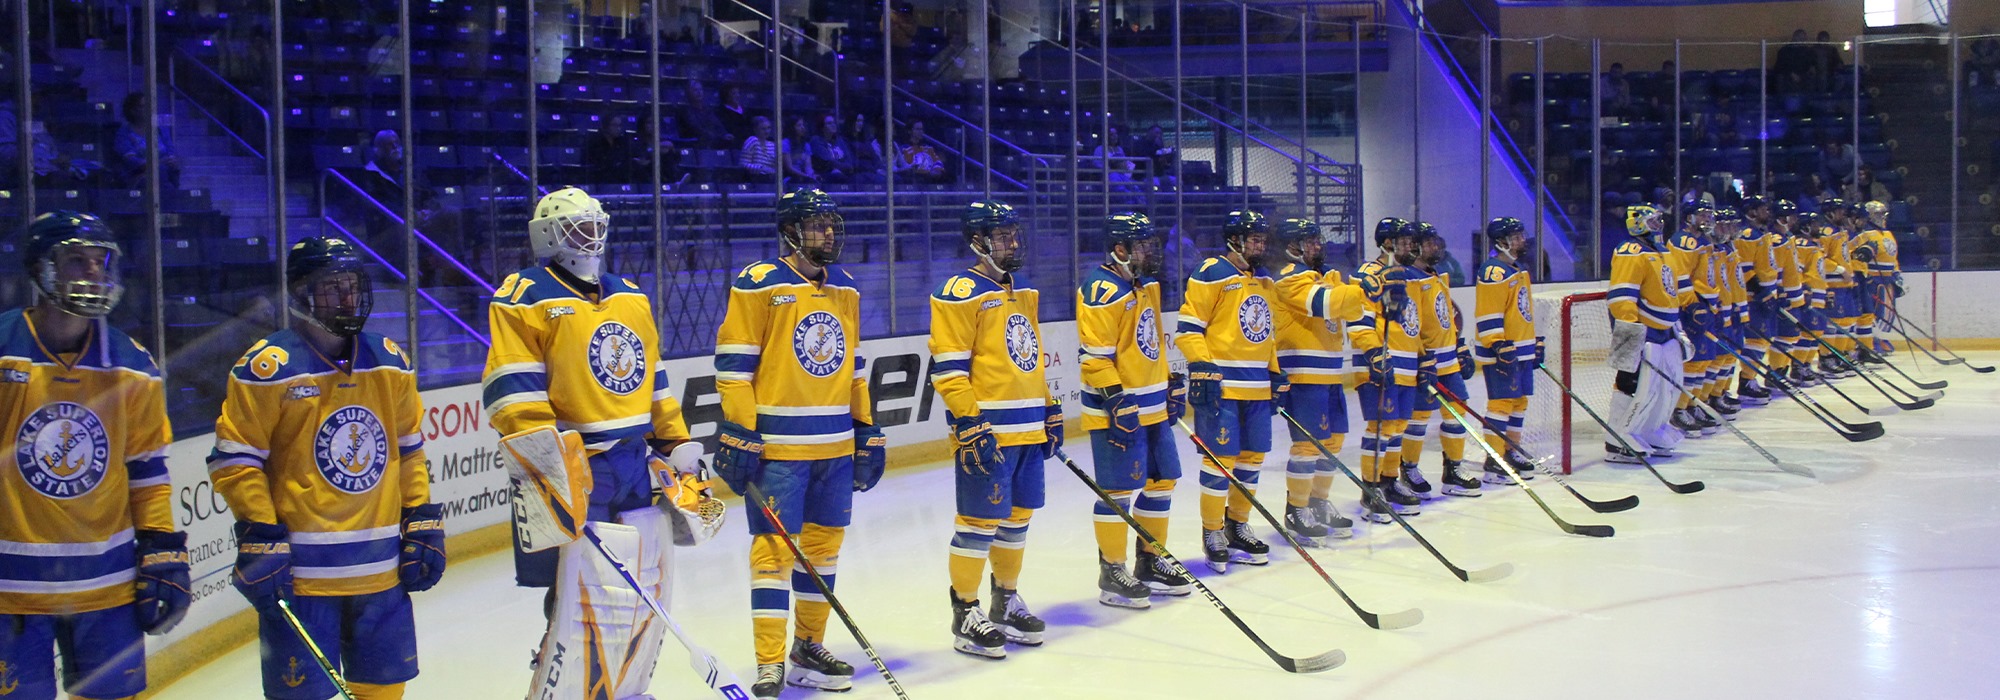 laker lineup on ice